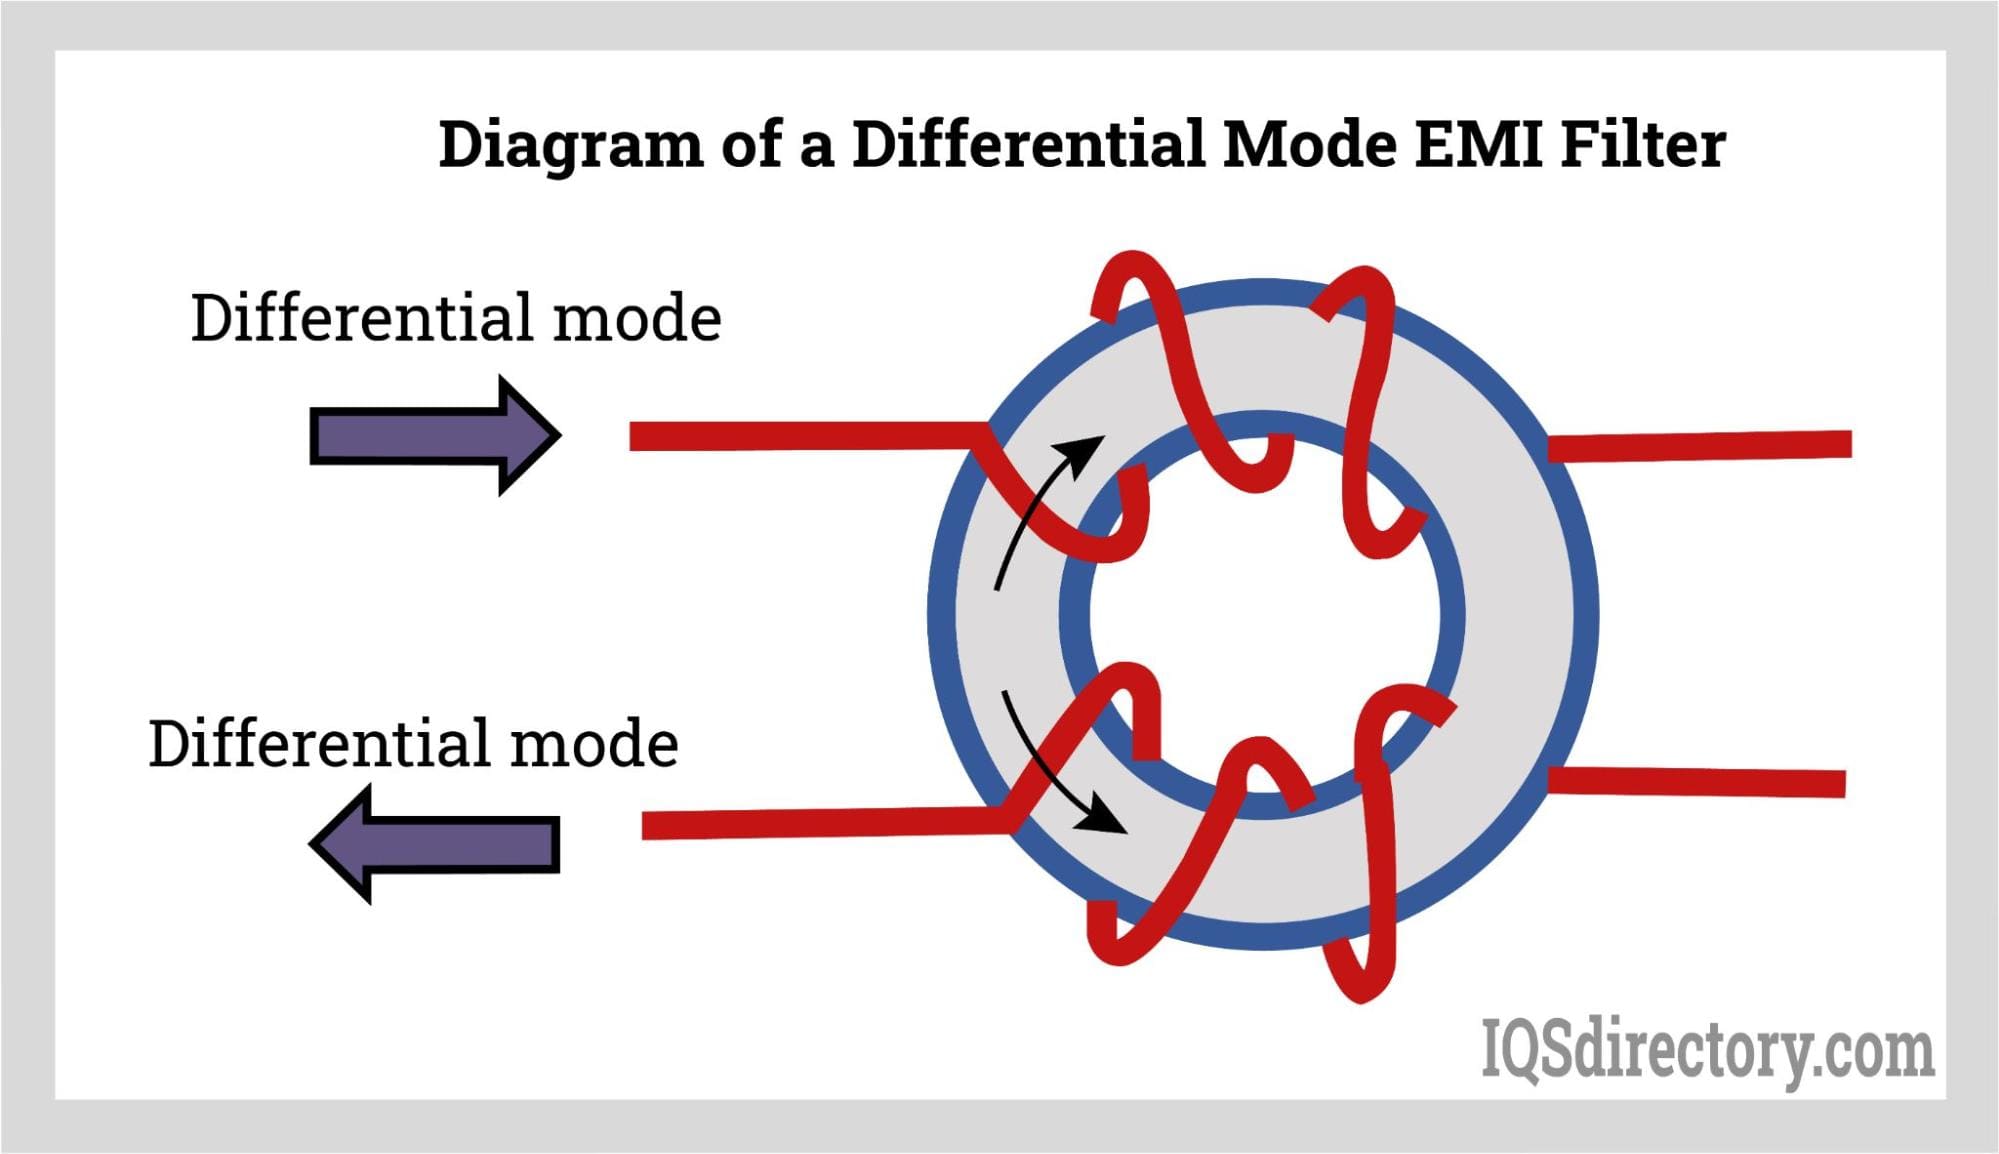 Diagram of a Differential Mode EMI Filter